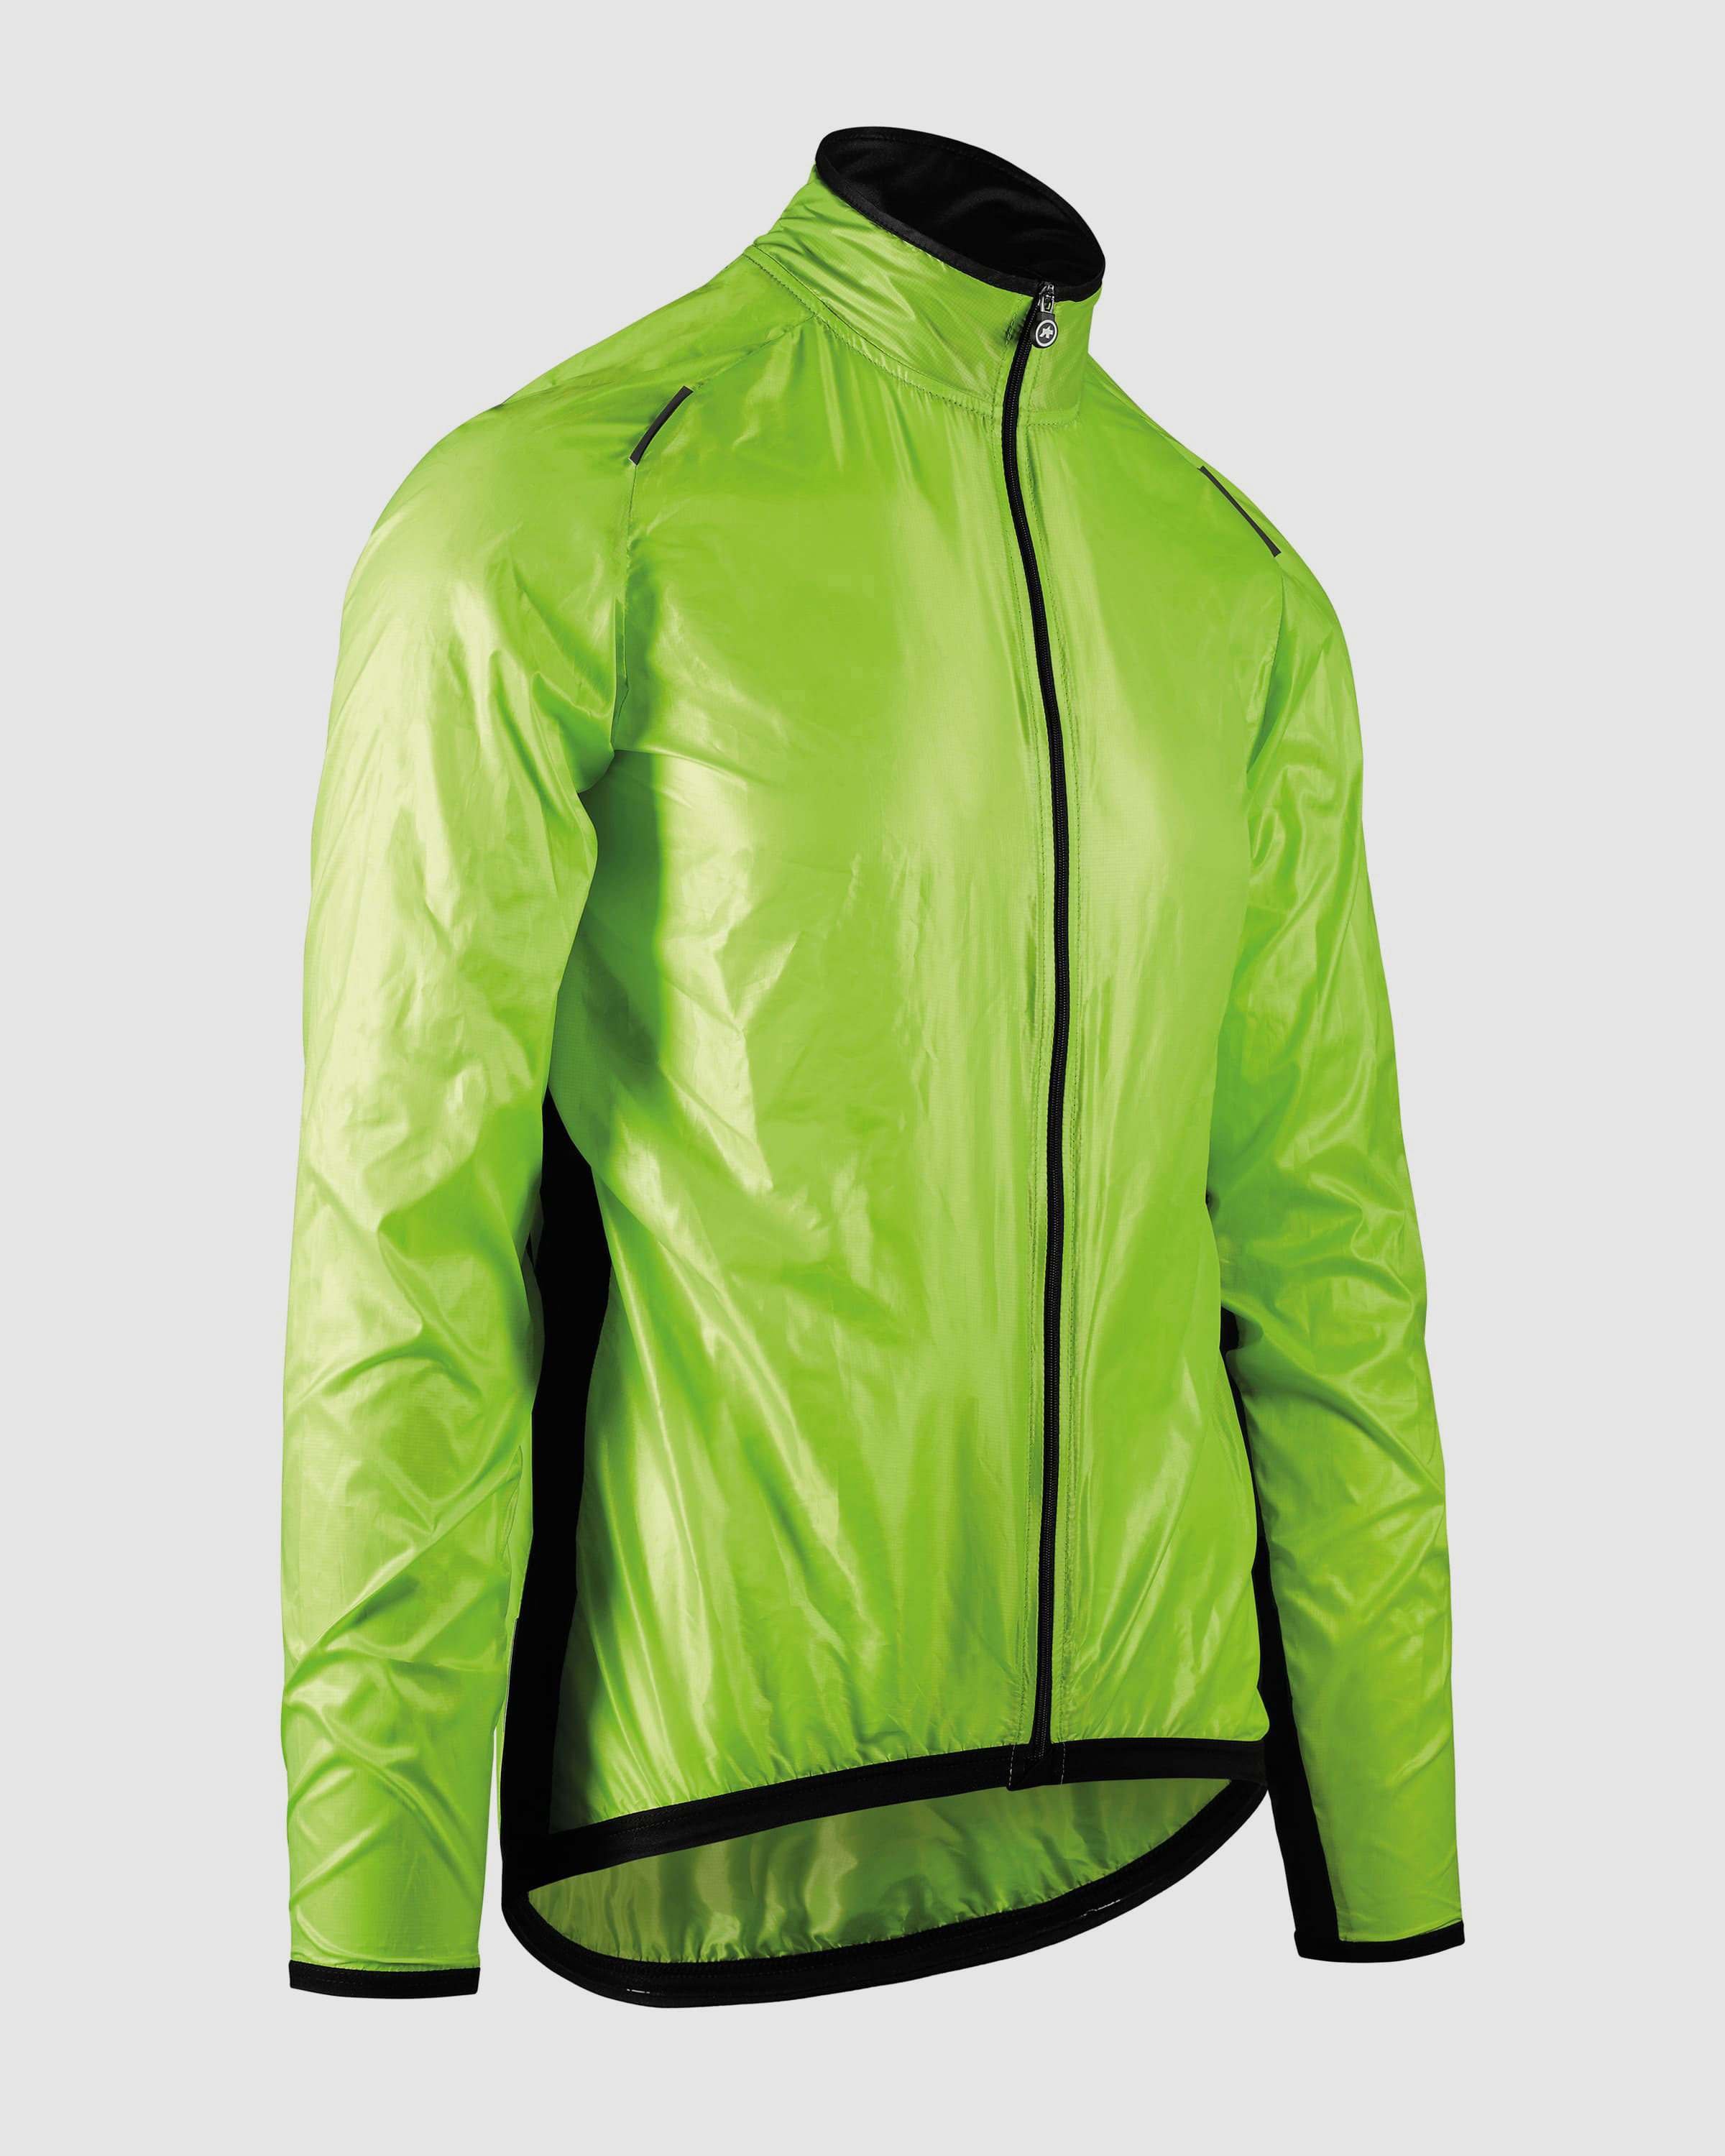 MILLE GT wind jacket - ASSOS Of Switzerland - Official Outlet